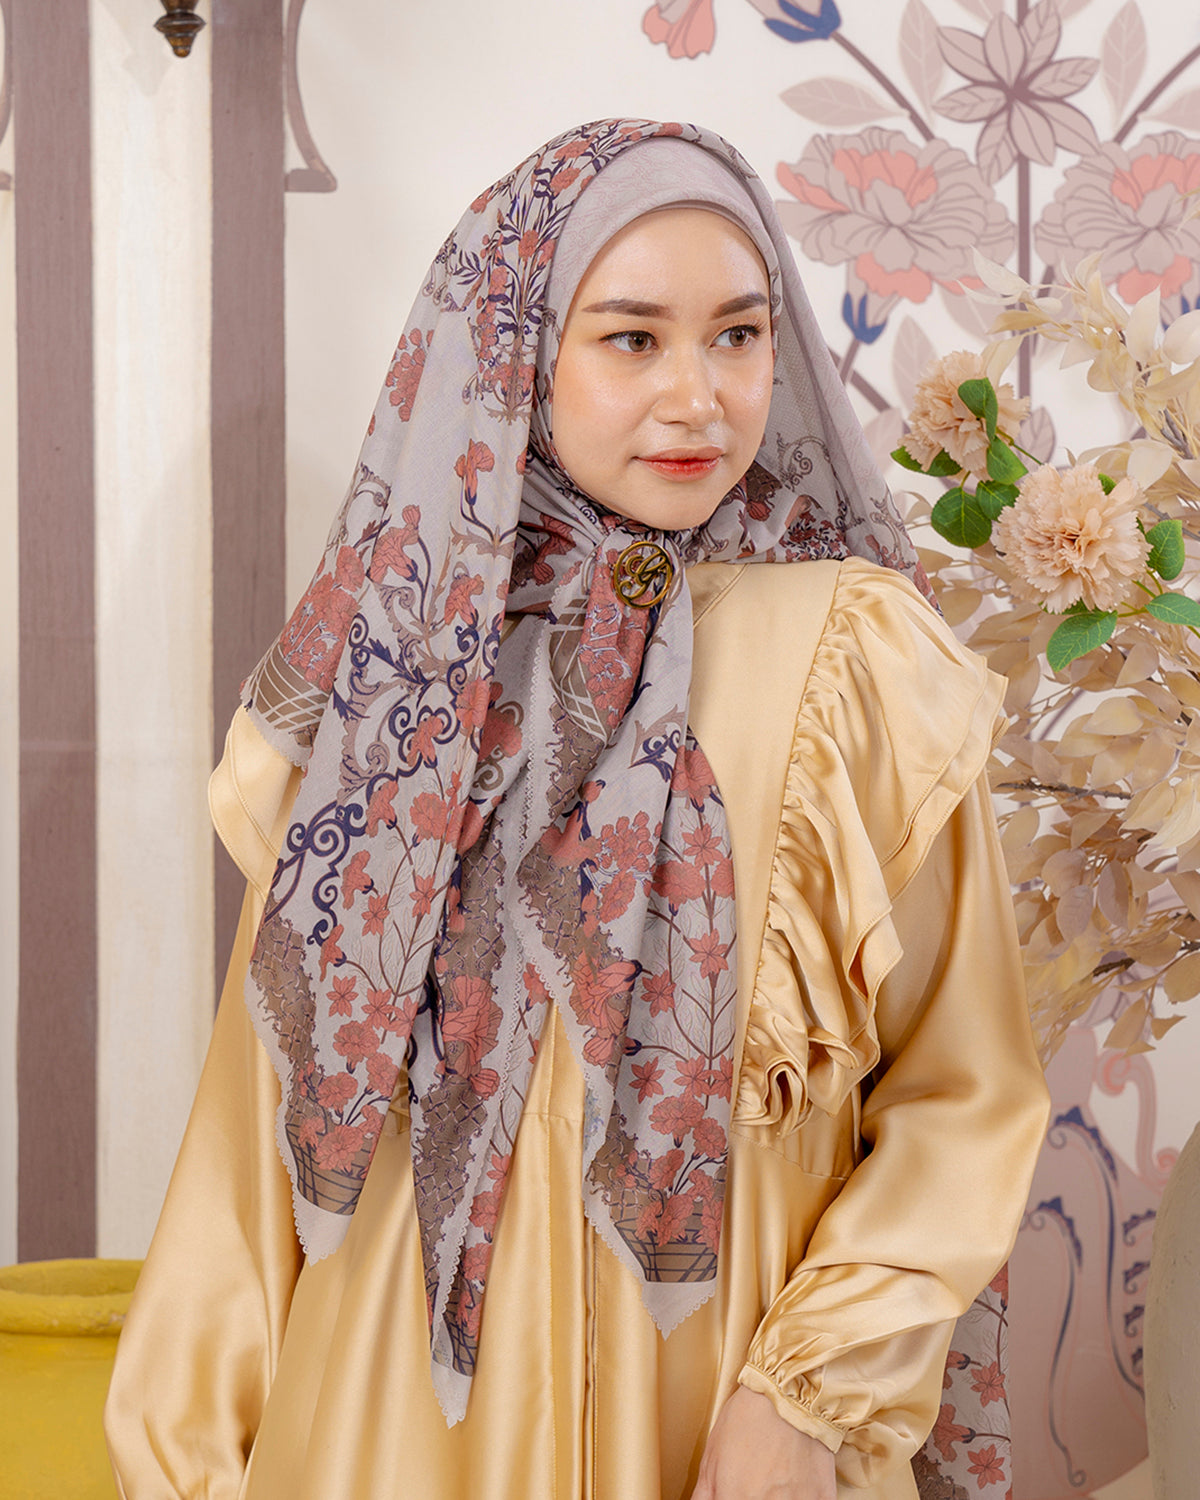 Marygold Scarf in Spring Baileya PO DP 50%